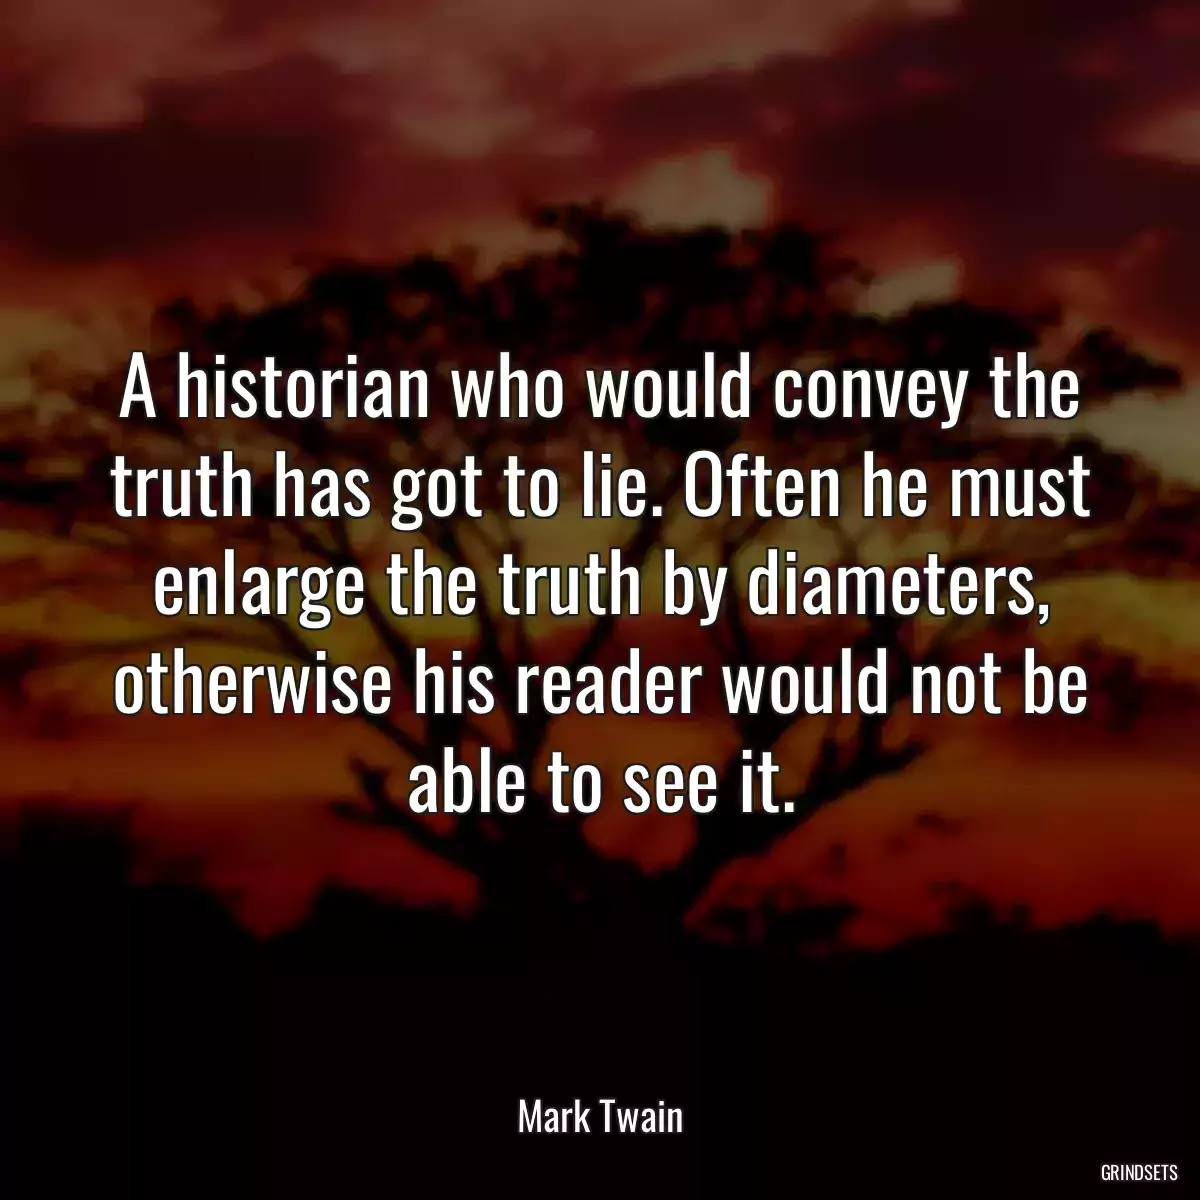 A historian who would convey the truth has got to lie. Often he must enlarge the truth by diameters, otherwise his reader would not be able to see it.